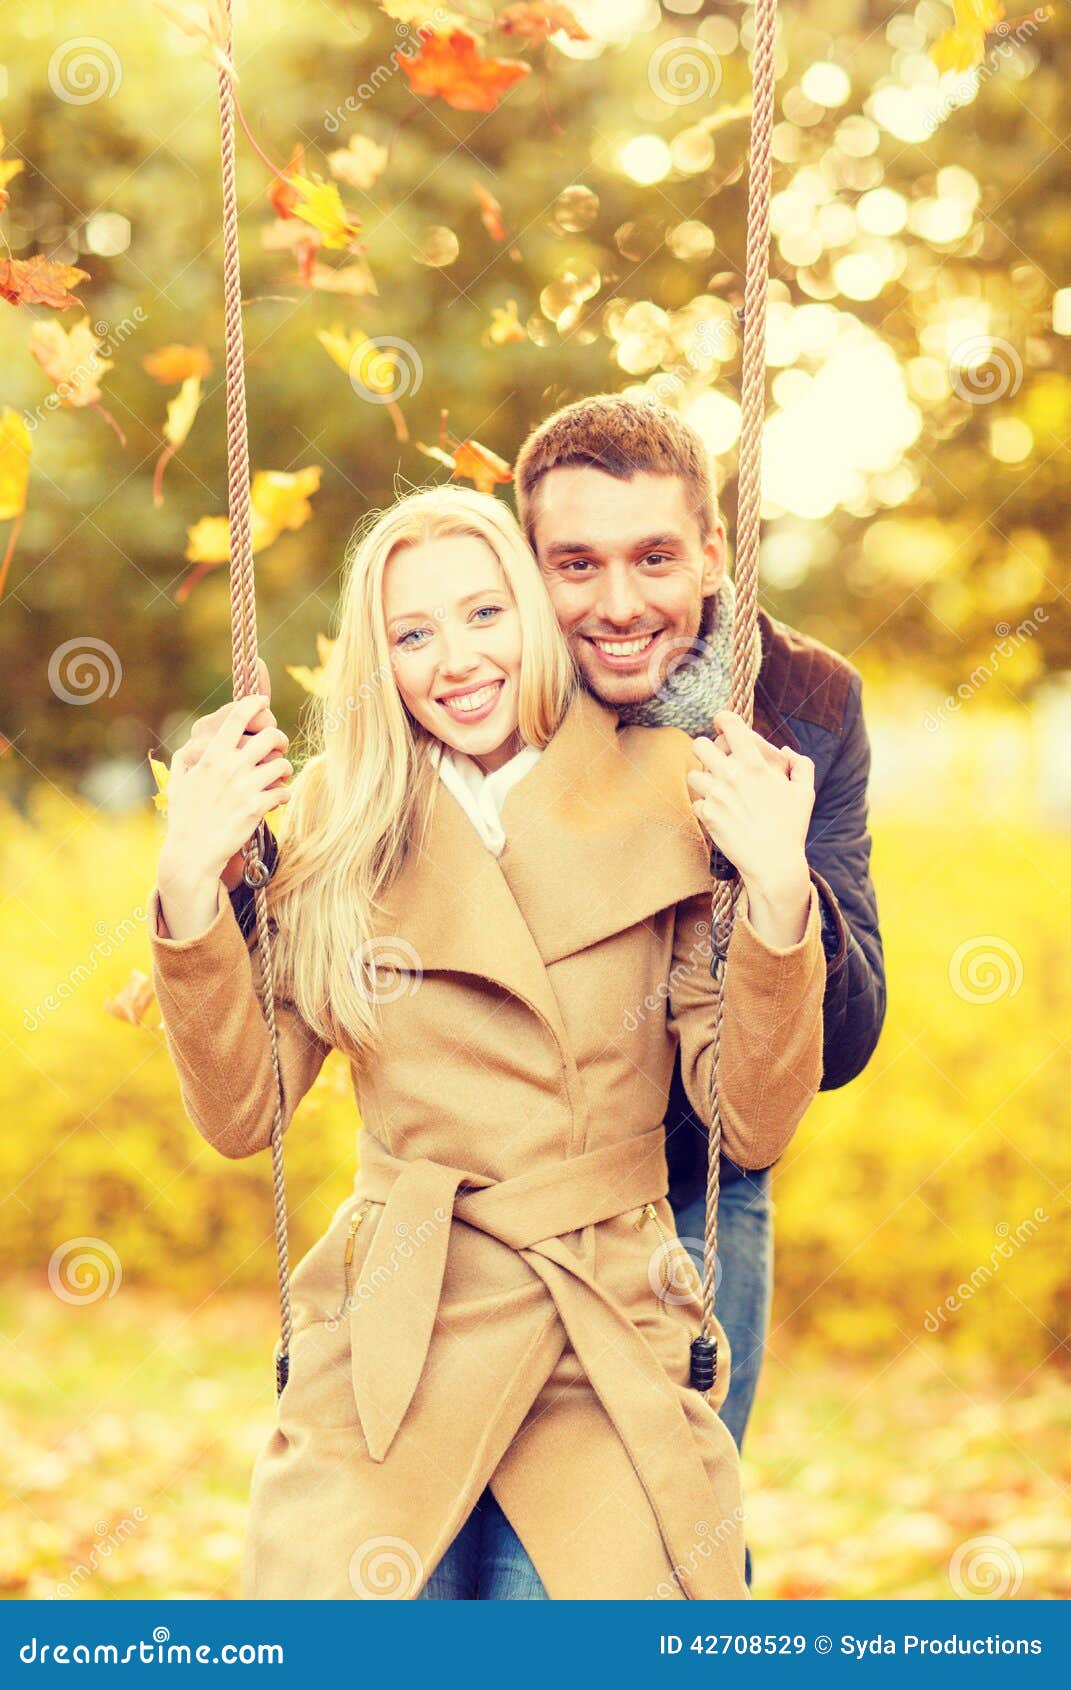 Holidays, love, travel, relationship and dating concept - romantic couple in the autumn park.